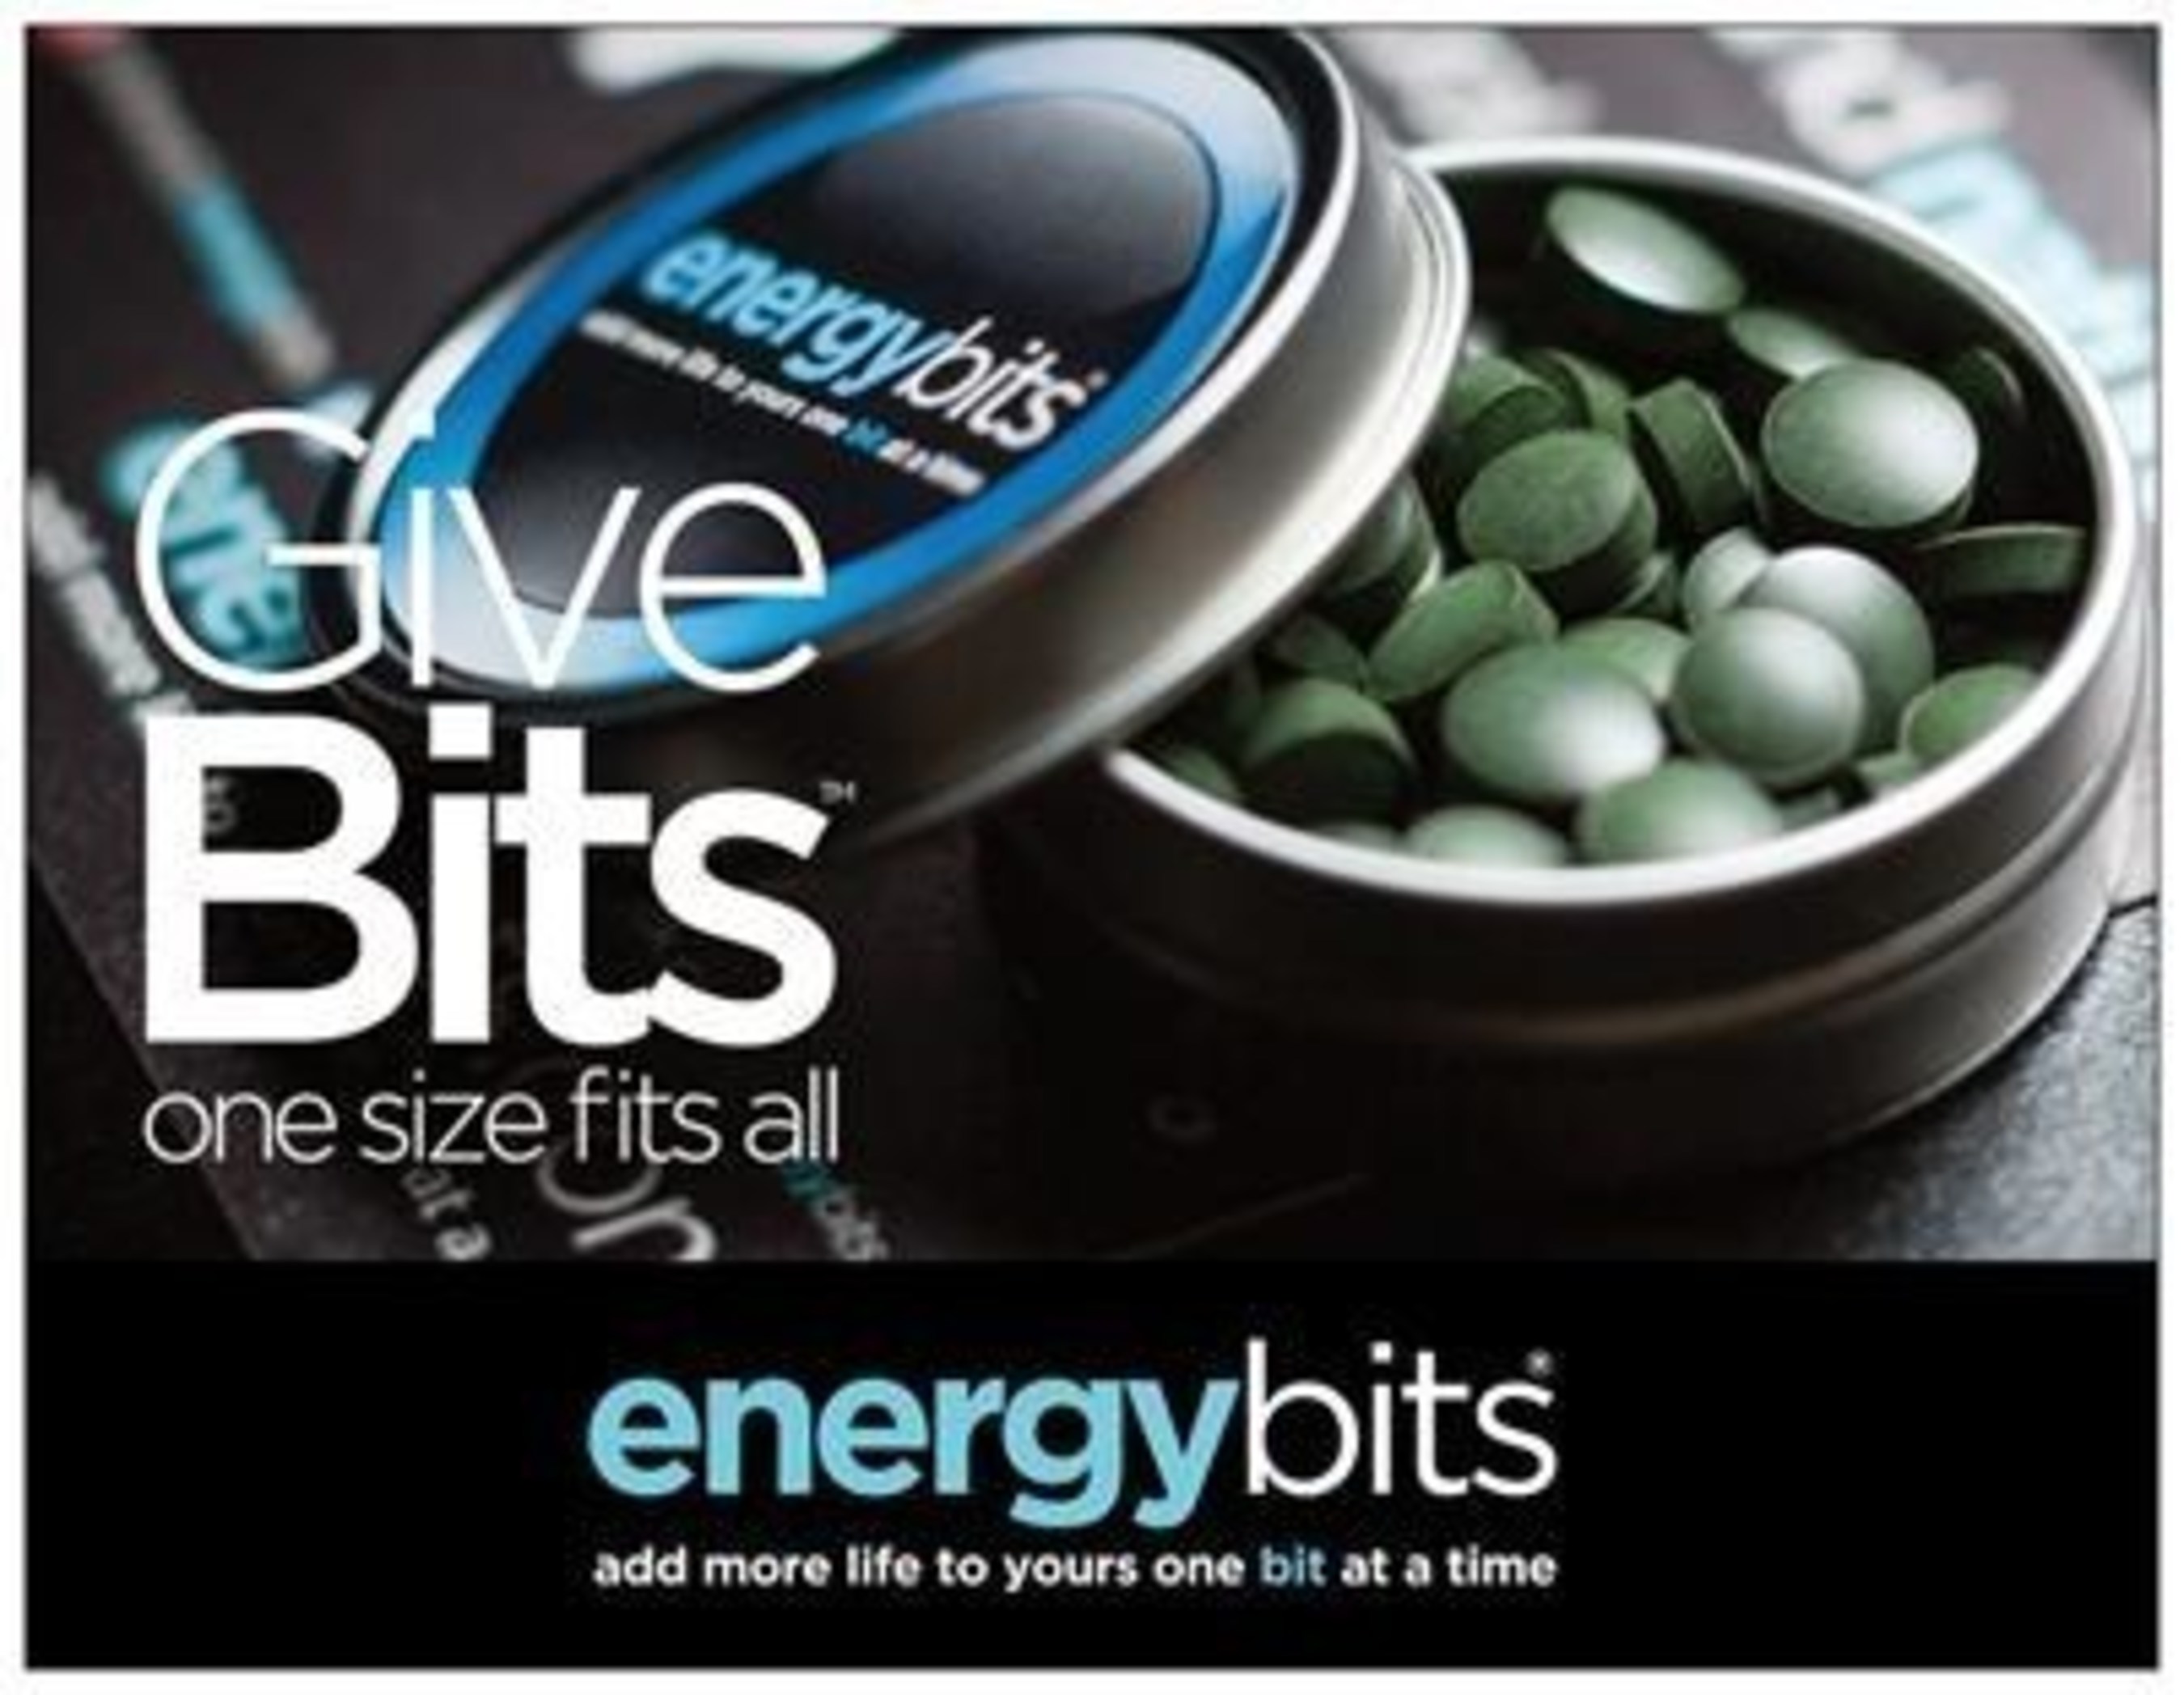 For a gift that fits, give bits - ENERGYbits